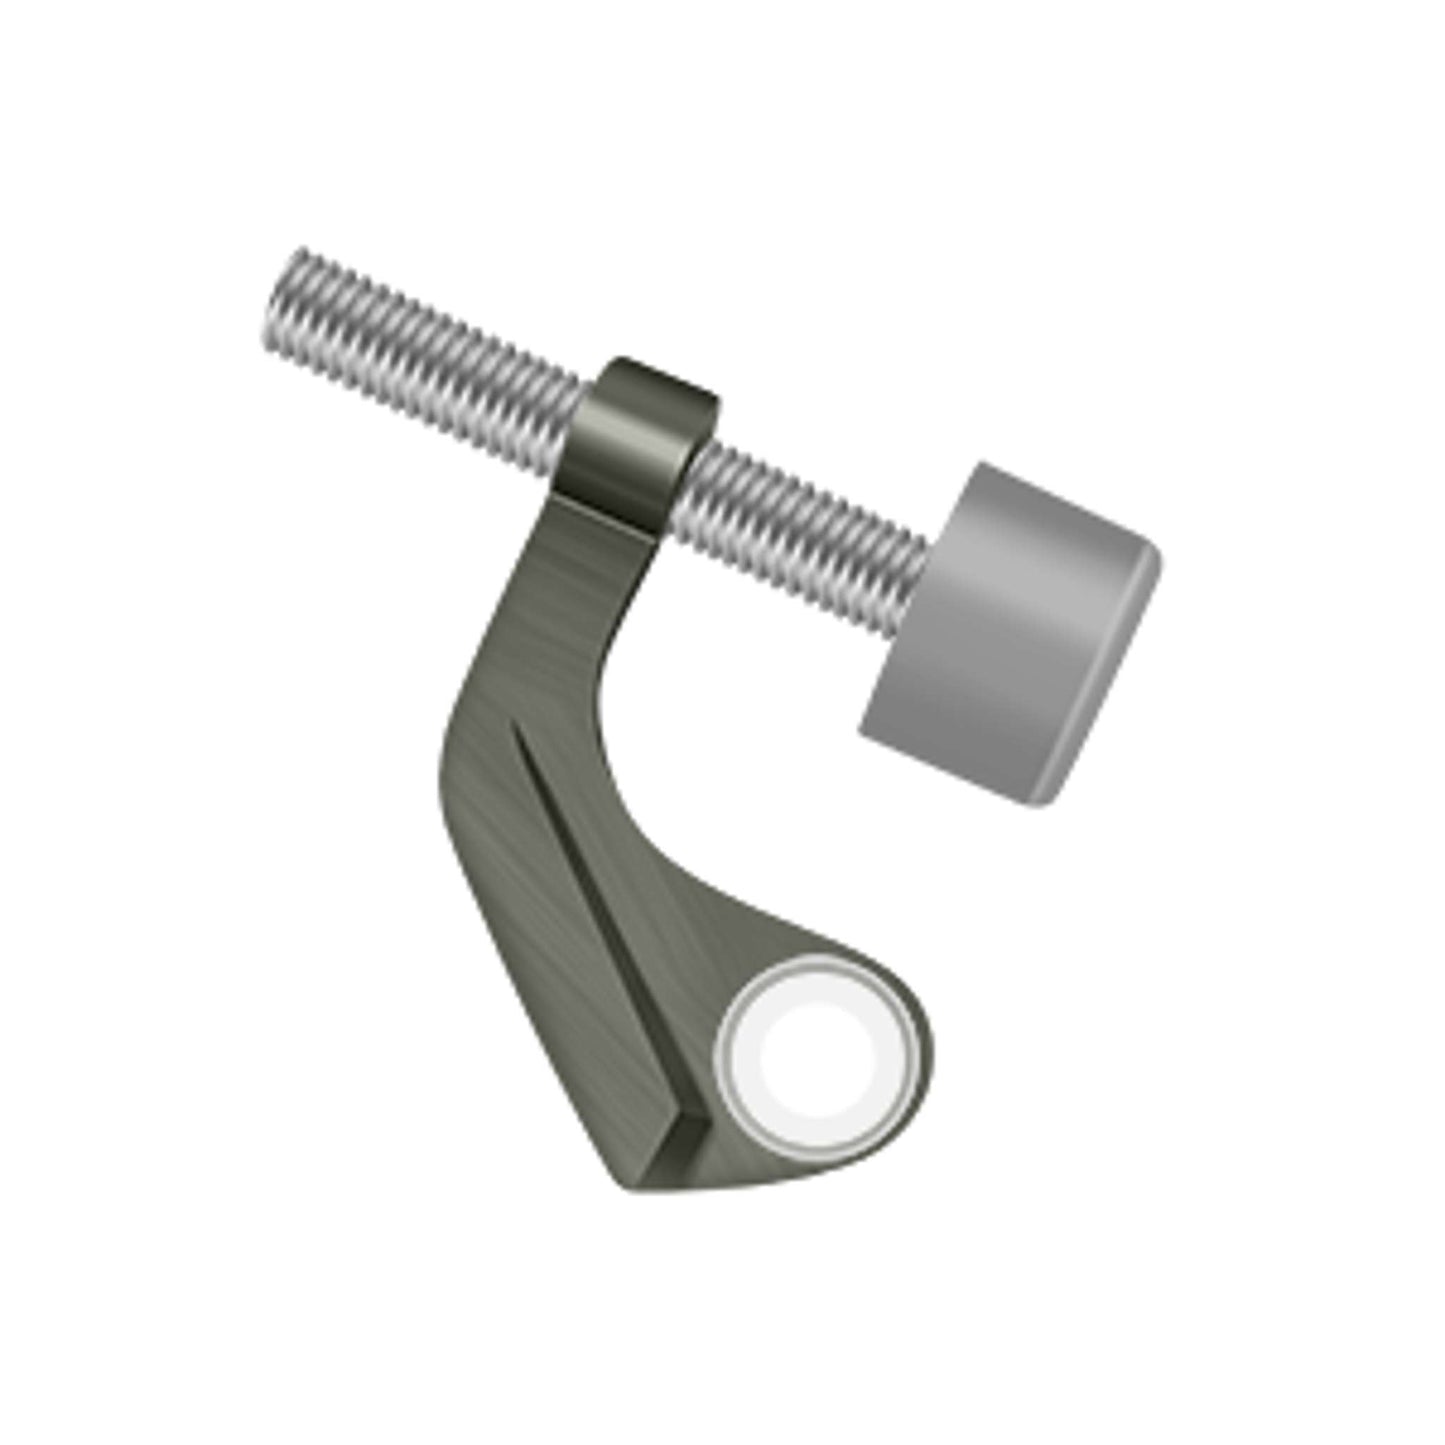 Deltana - Hinge Pin Stop, Hinge Mounted for Steel Hinges